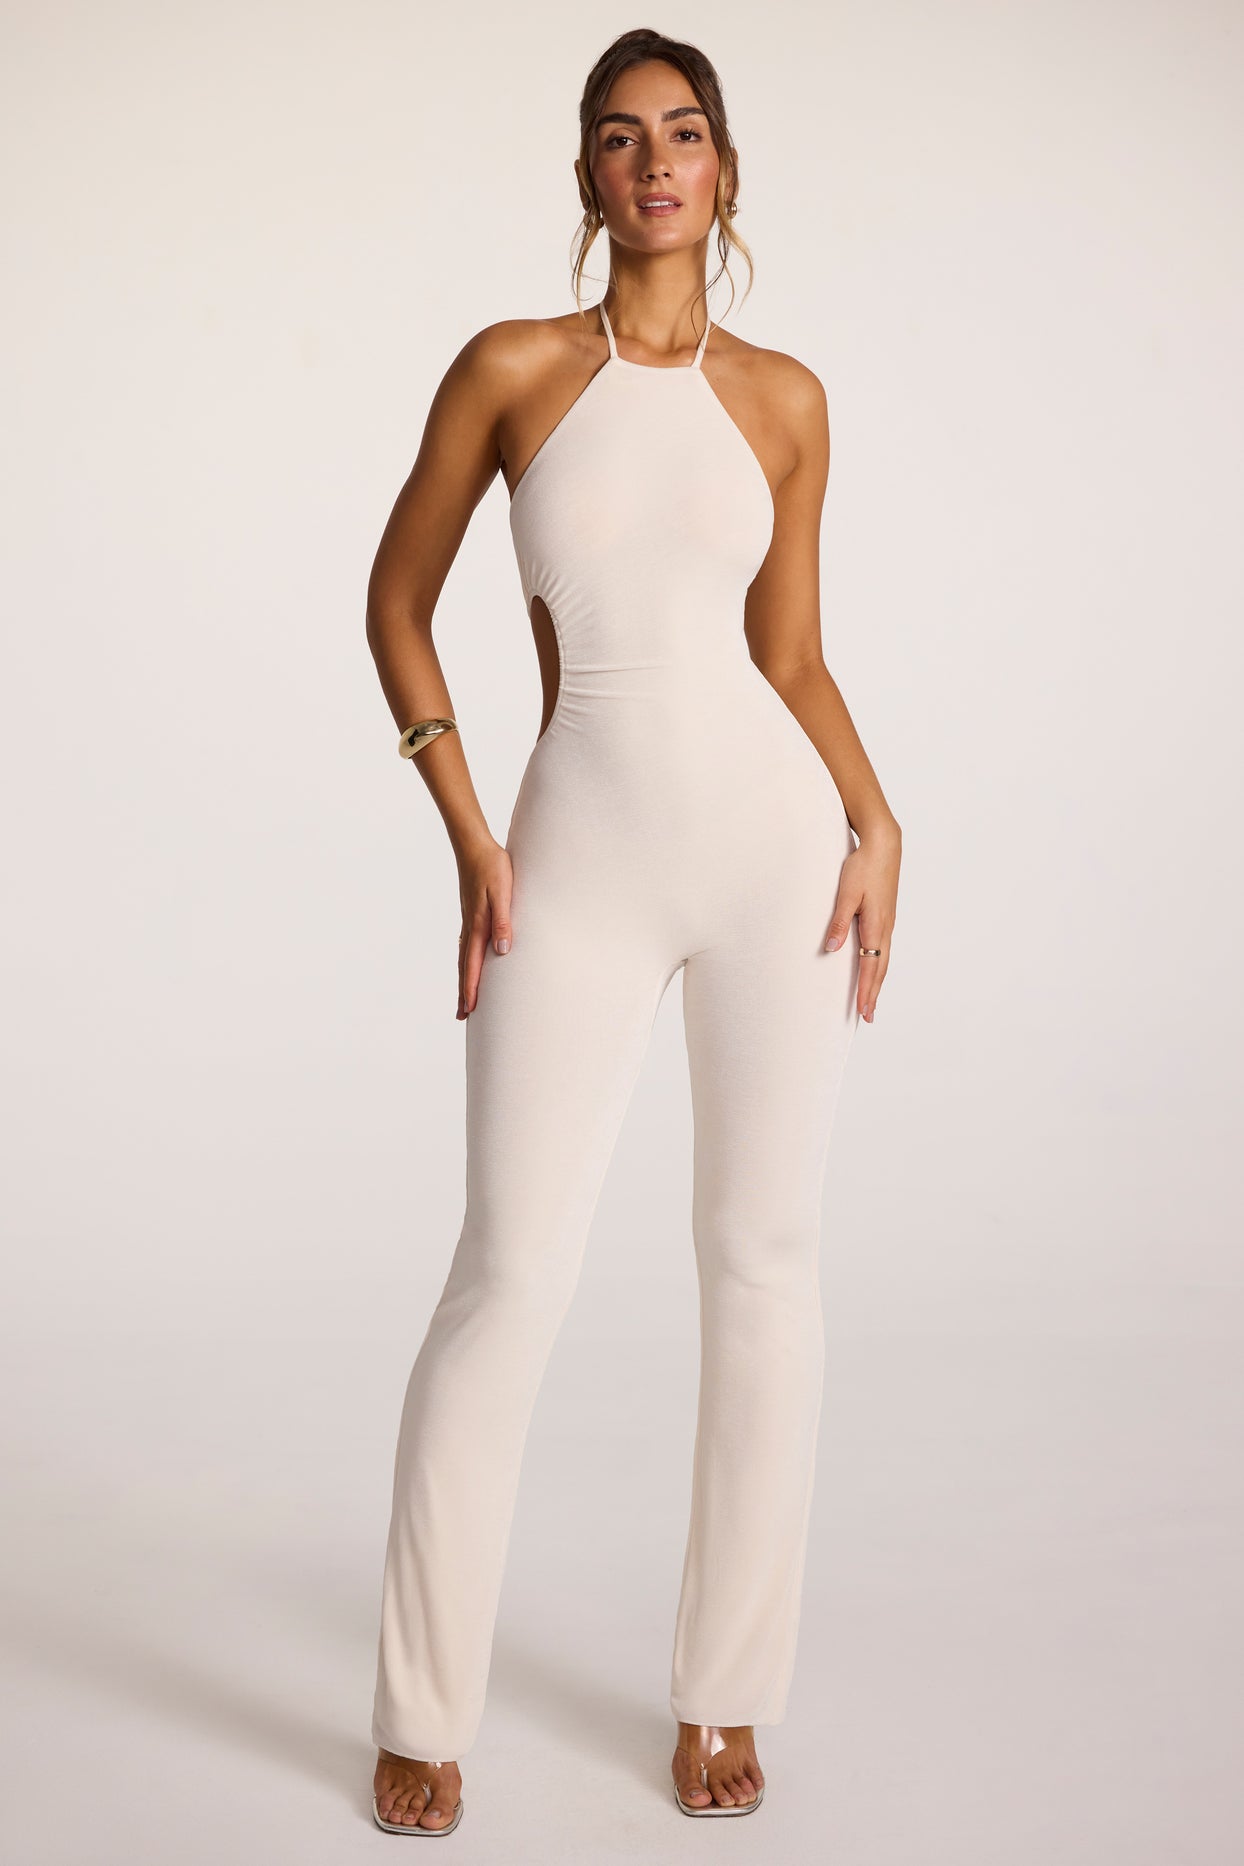 Petite Textured Jersey Halter Neck Ruched Cut Out Jumpsuit in Ivory